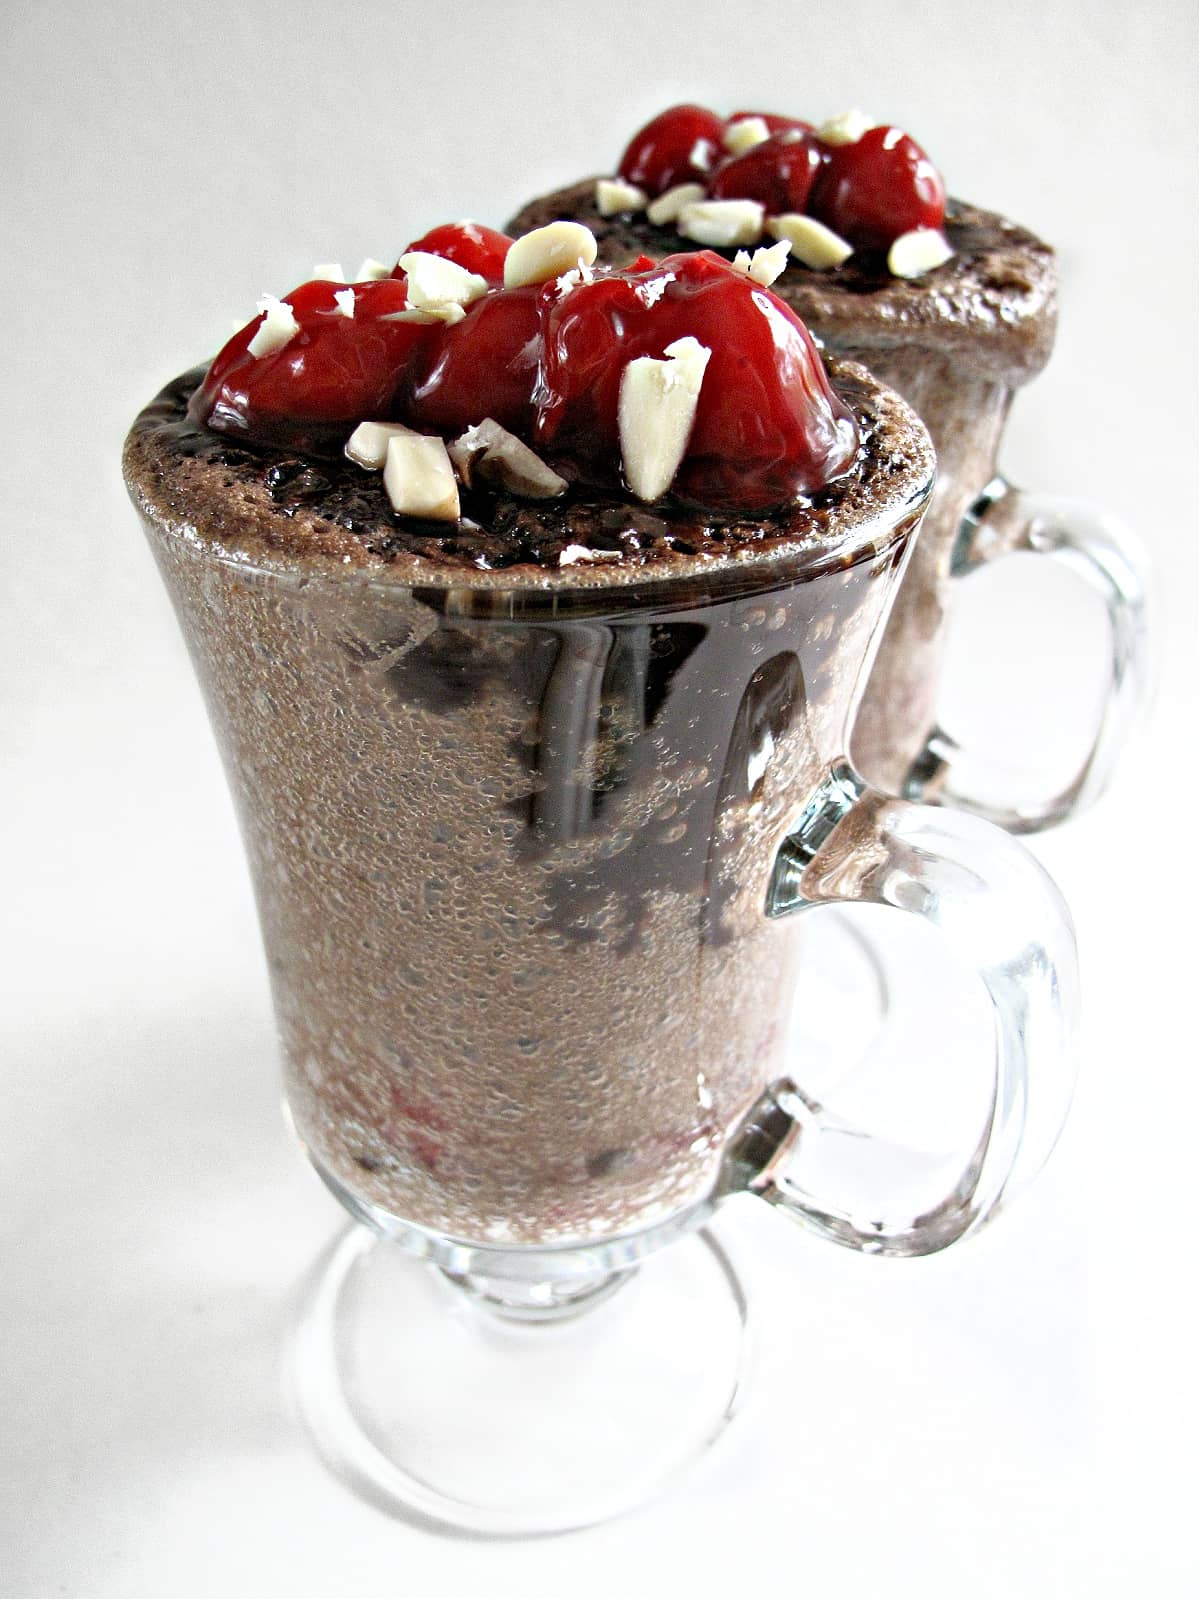 Chocolate cake in a mug topped with cherries and almonds.